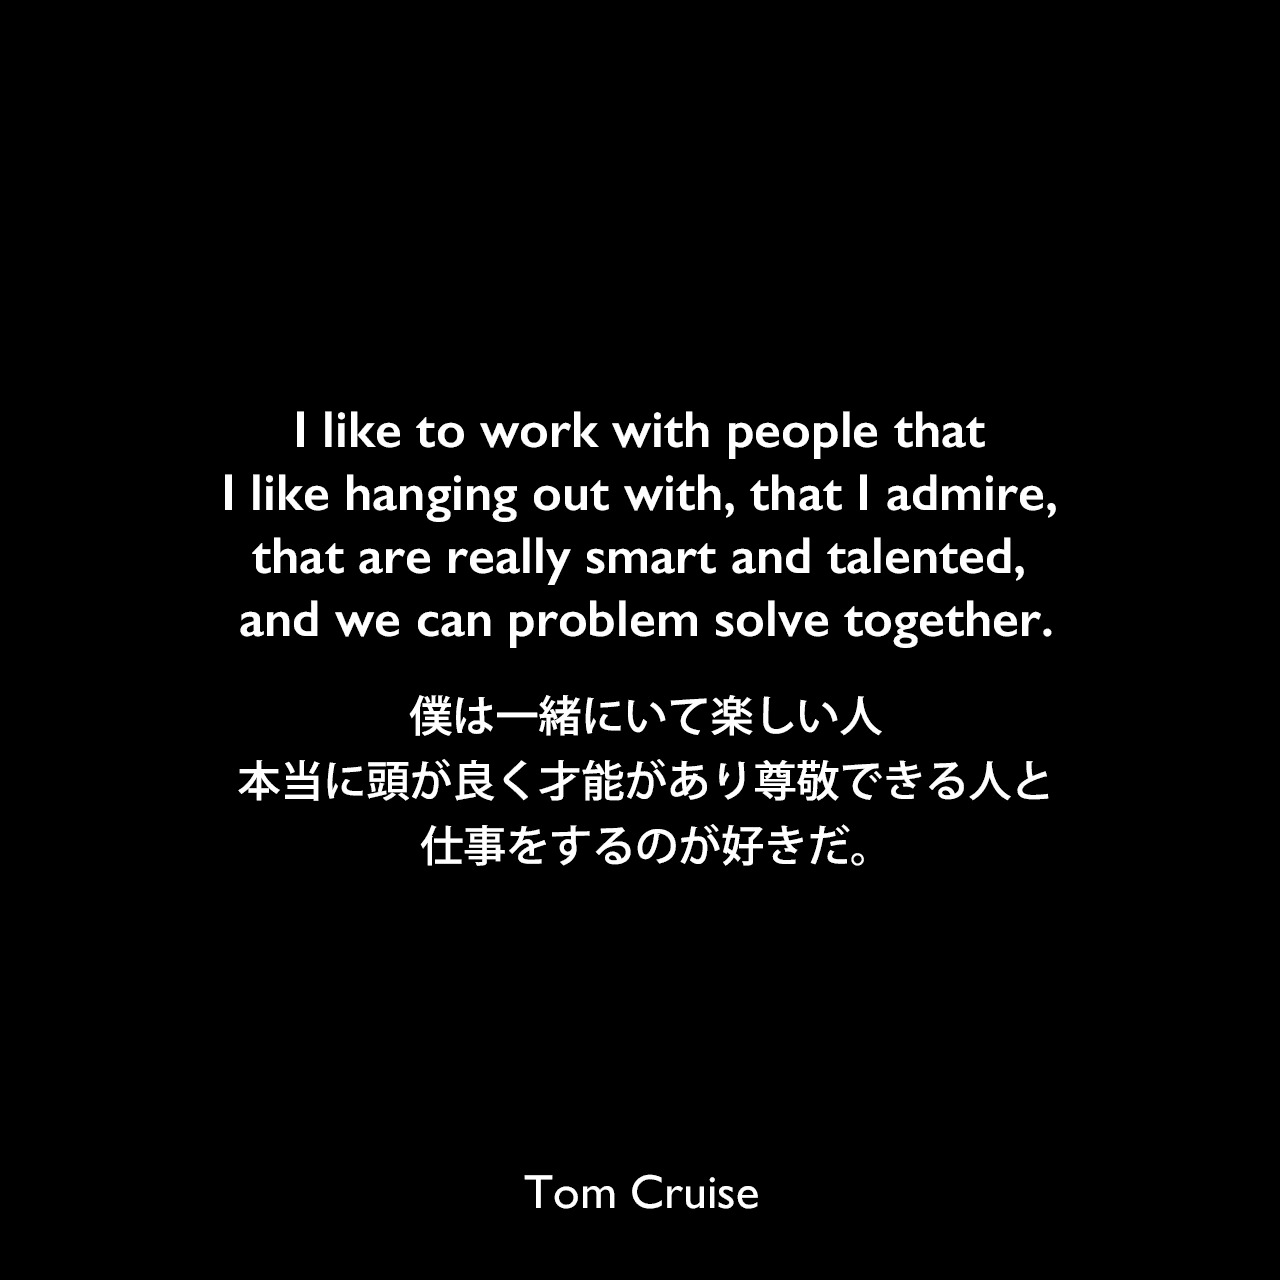 I like to work with people that I like hanging out with, that I admire, that are really smart and talented, and we can problem solve together.僕は一緒にいて楽しい人、本当に頭が良く才能があり尊敬できる人と仕事をするのが好きだ。Tom Cruise